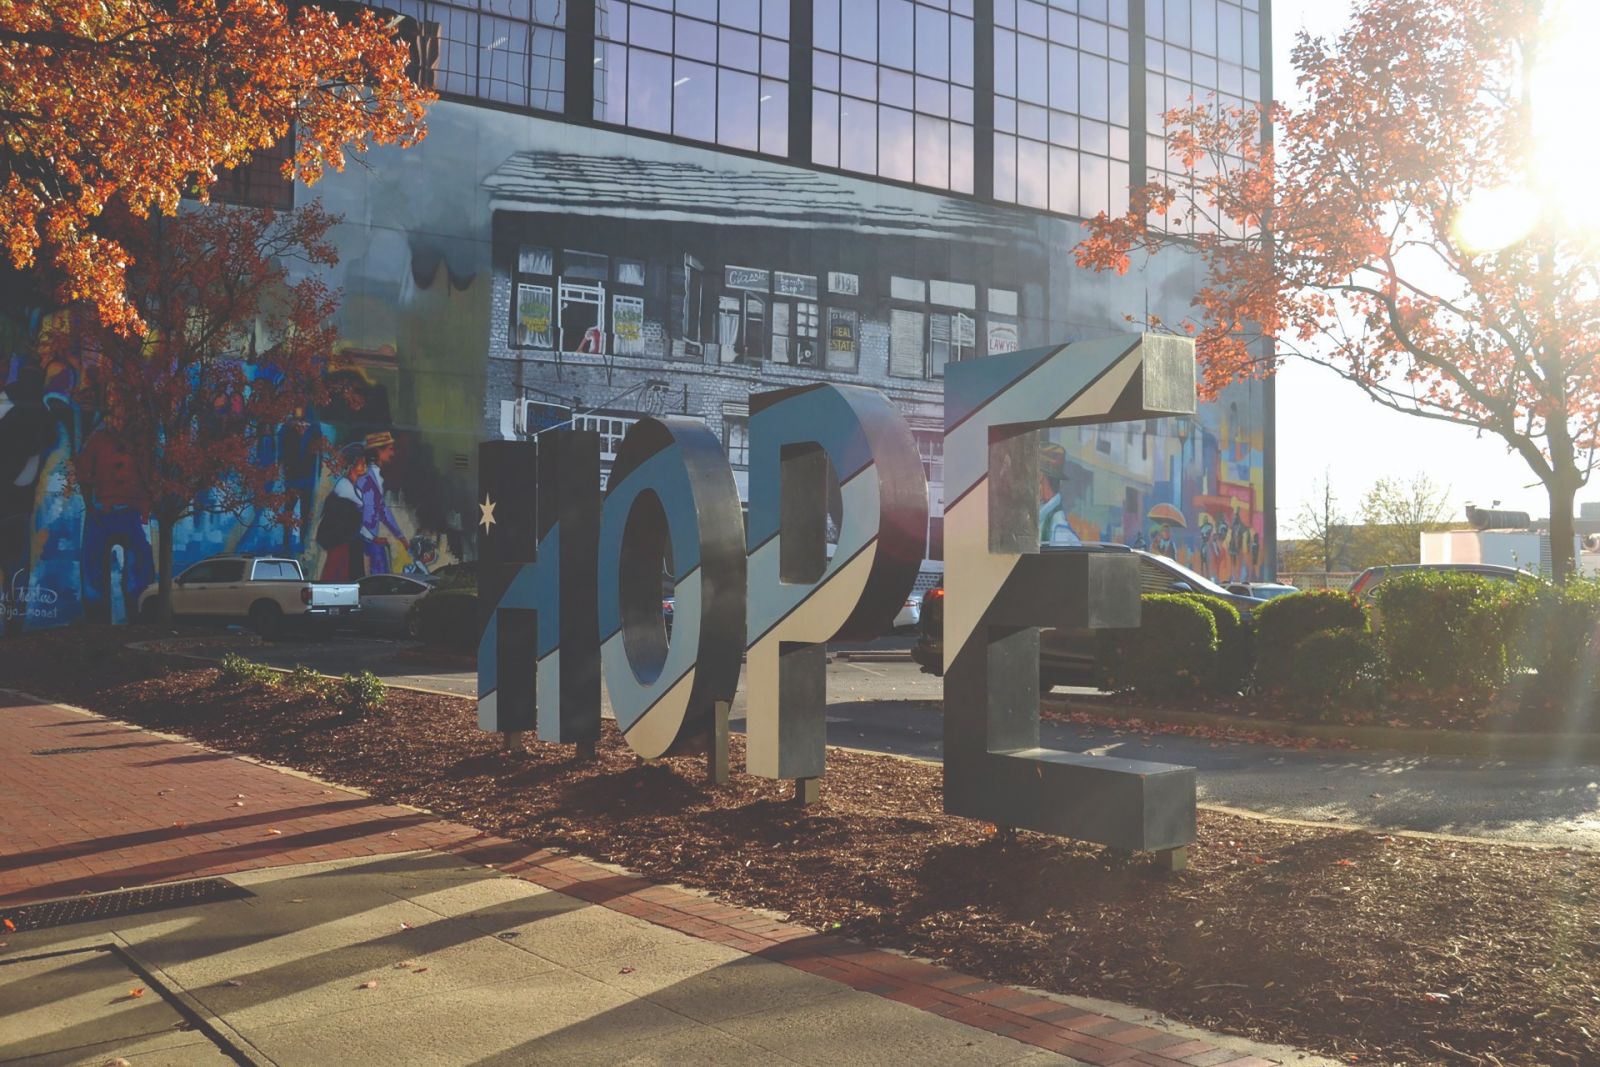 The Hope sign, sponsored by City Center Partnership, has popped up along Columbia's Main Street in various spots during the pandemic as tangible encouragement. (Photo/Melinda Waldrop)